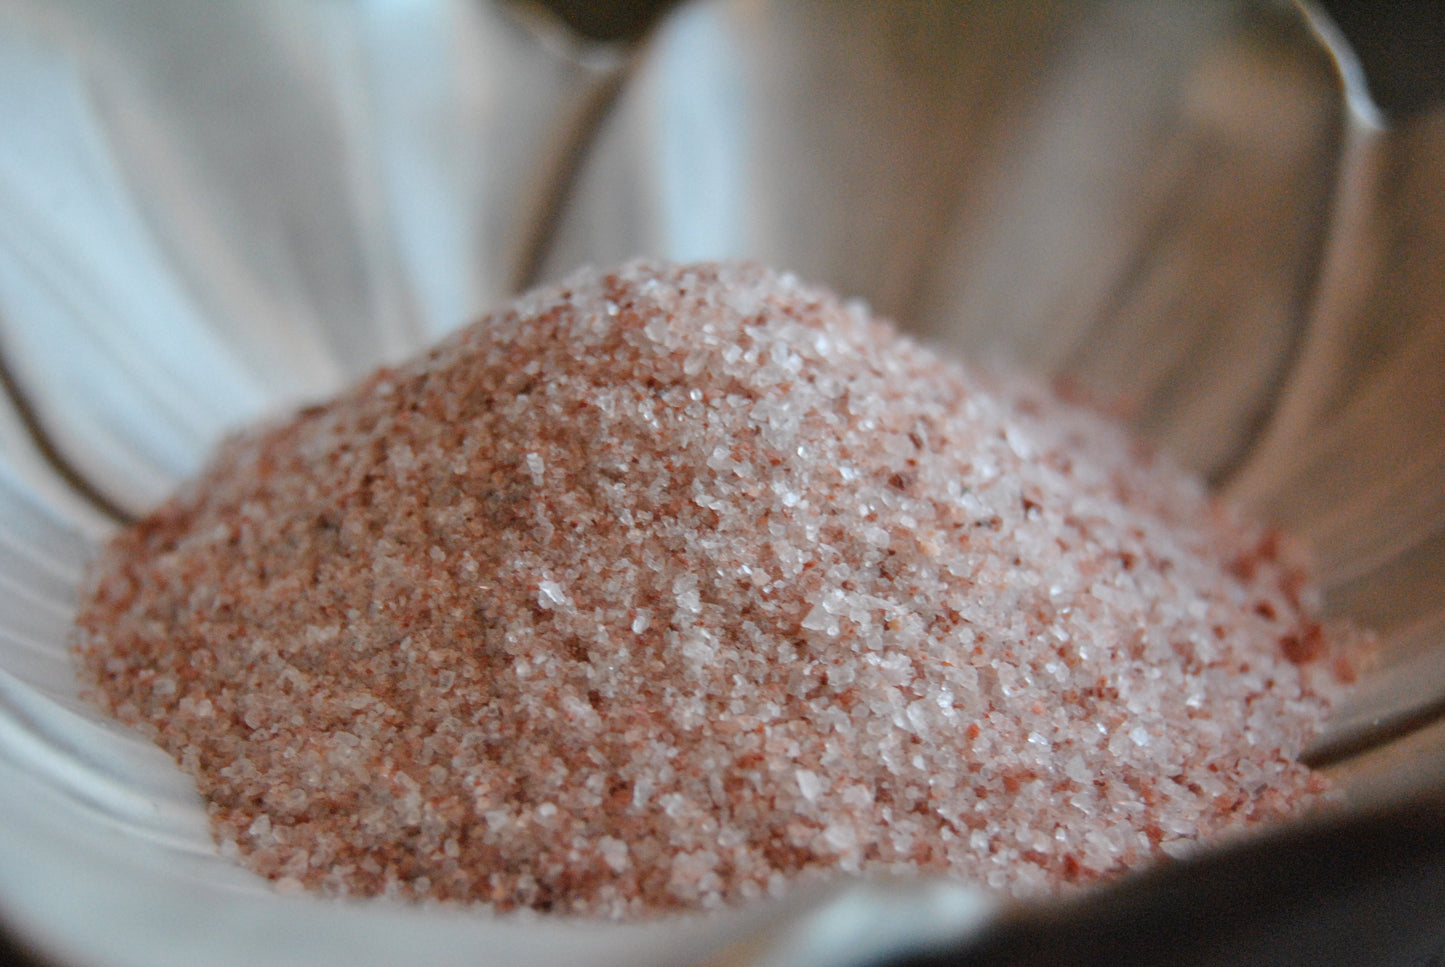 A pile of medium fine granules of pink himalayan salt rests in a white, flower shaped dish on a dark surface. The salt is light pink, with speckles of darker pink strewn throughout.